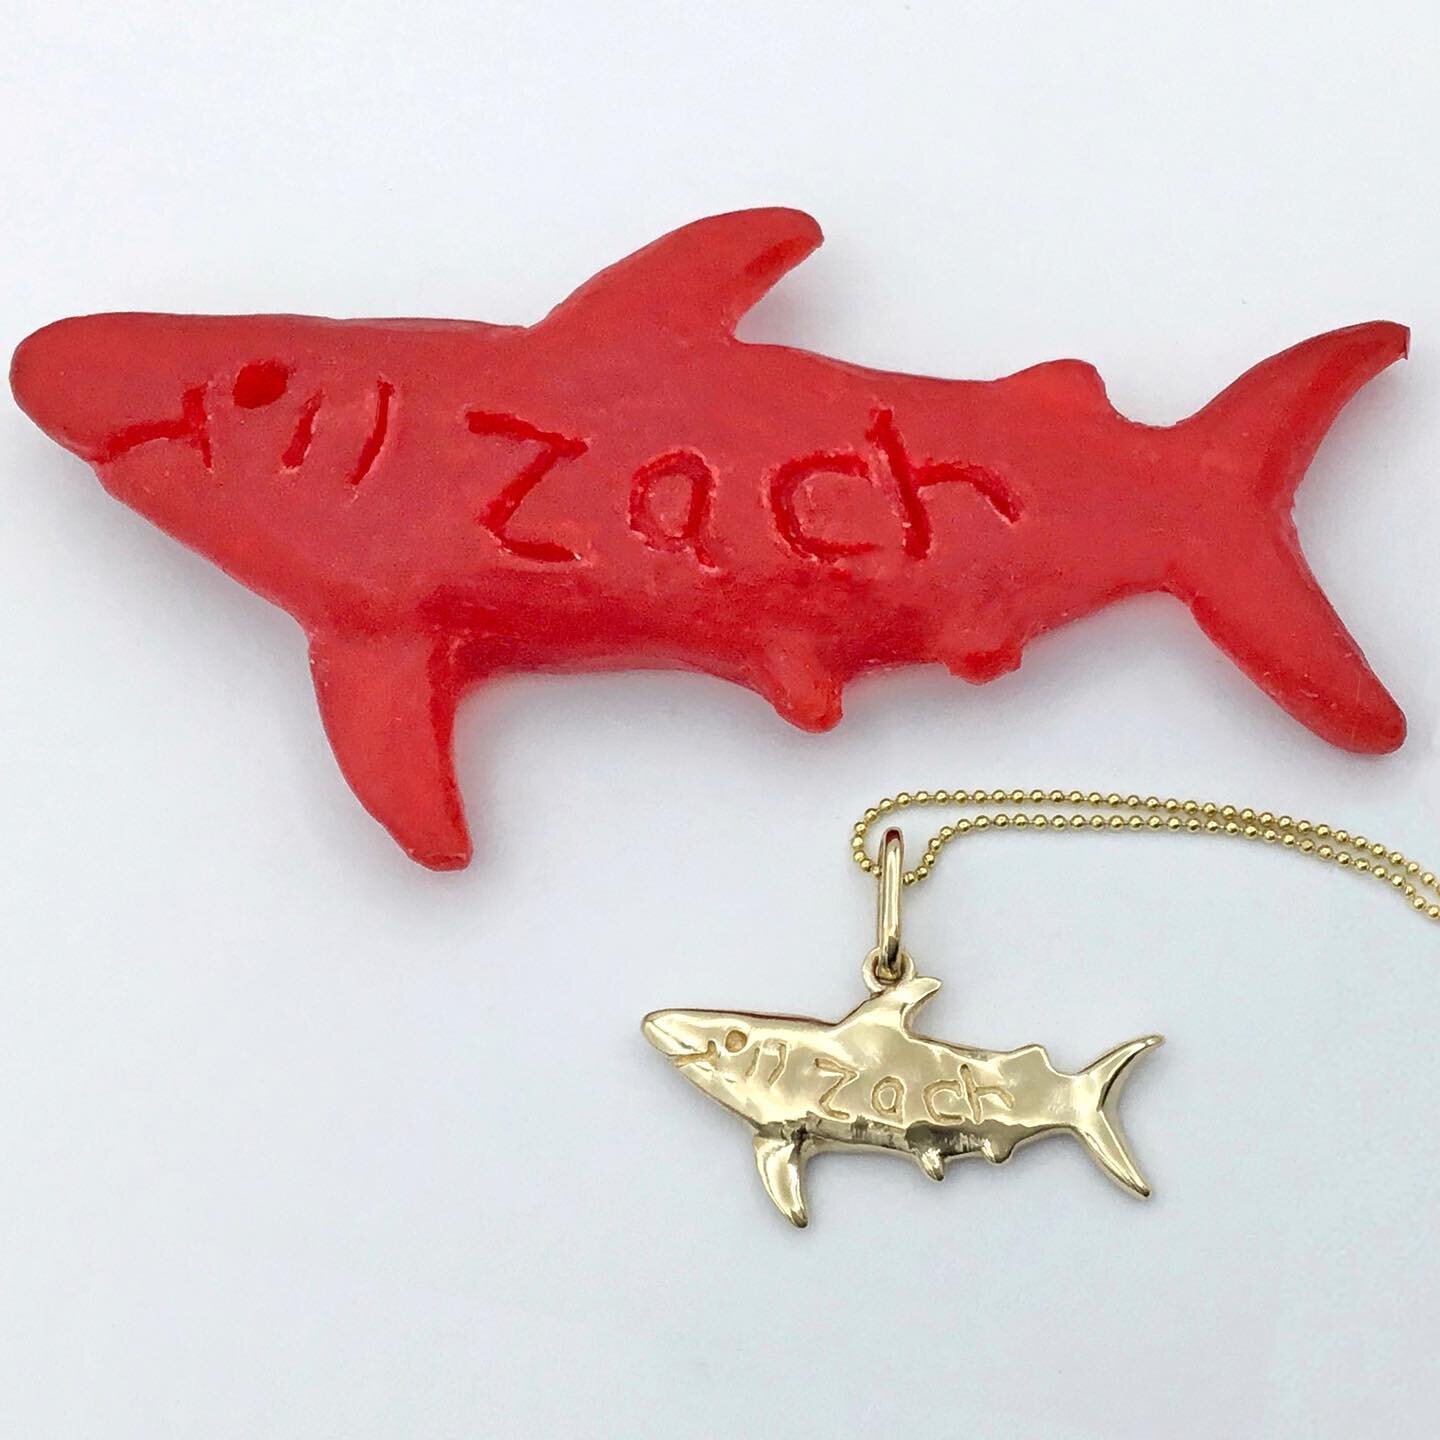 Zero surprise that Zach&rsquo;s mom loves her shark pendant. It&rsquo;s absolute perfection. 🦈

Outrageously cool and unexpected fine jewelry made at your kitchen table that are instant family heirlooms. 

.
.
.
.
#kidjeweler #bestgift #mothersday 
